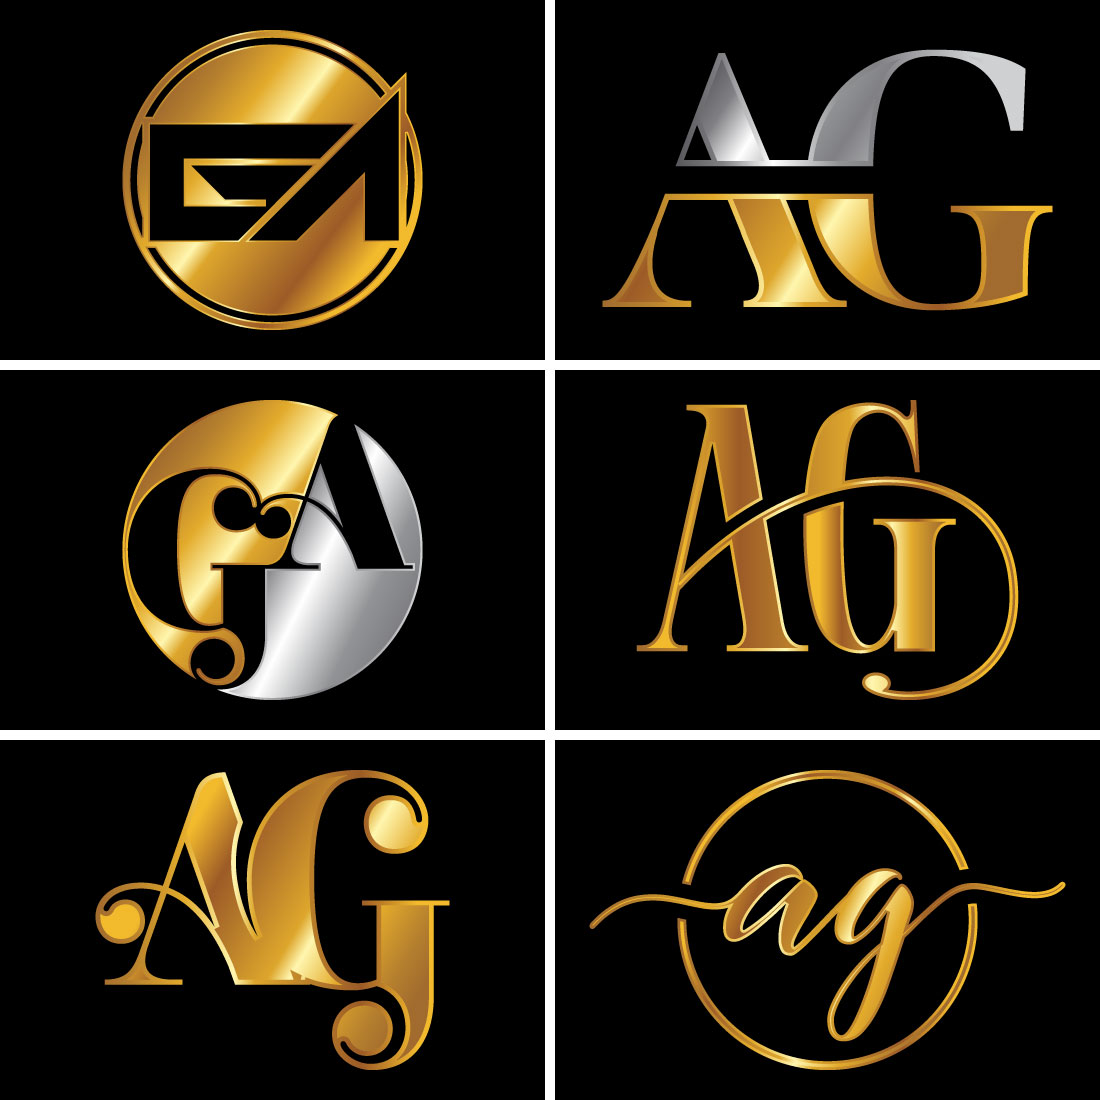 A-G Initial Letter Logo Design main cover.